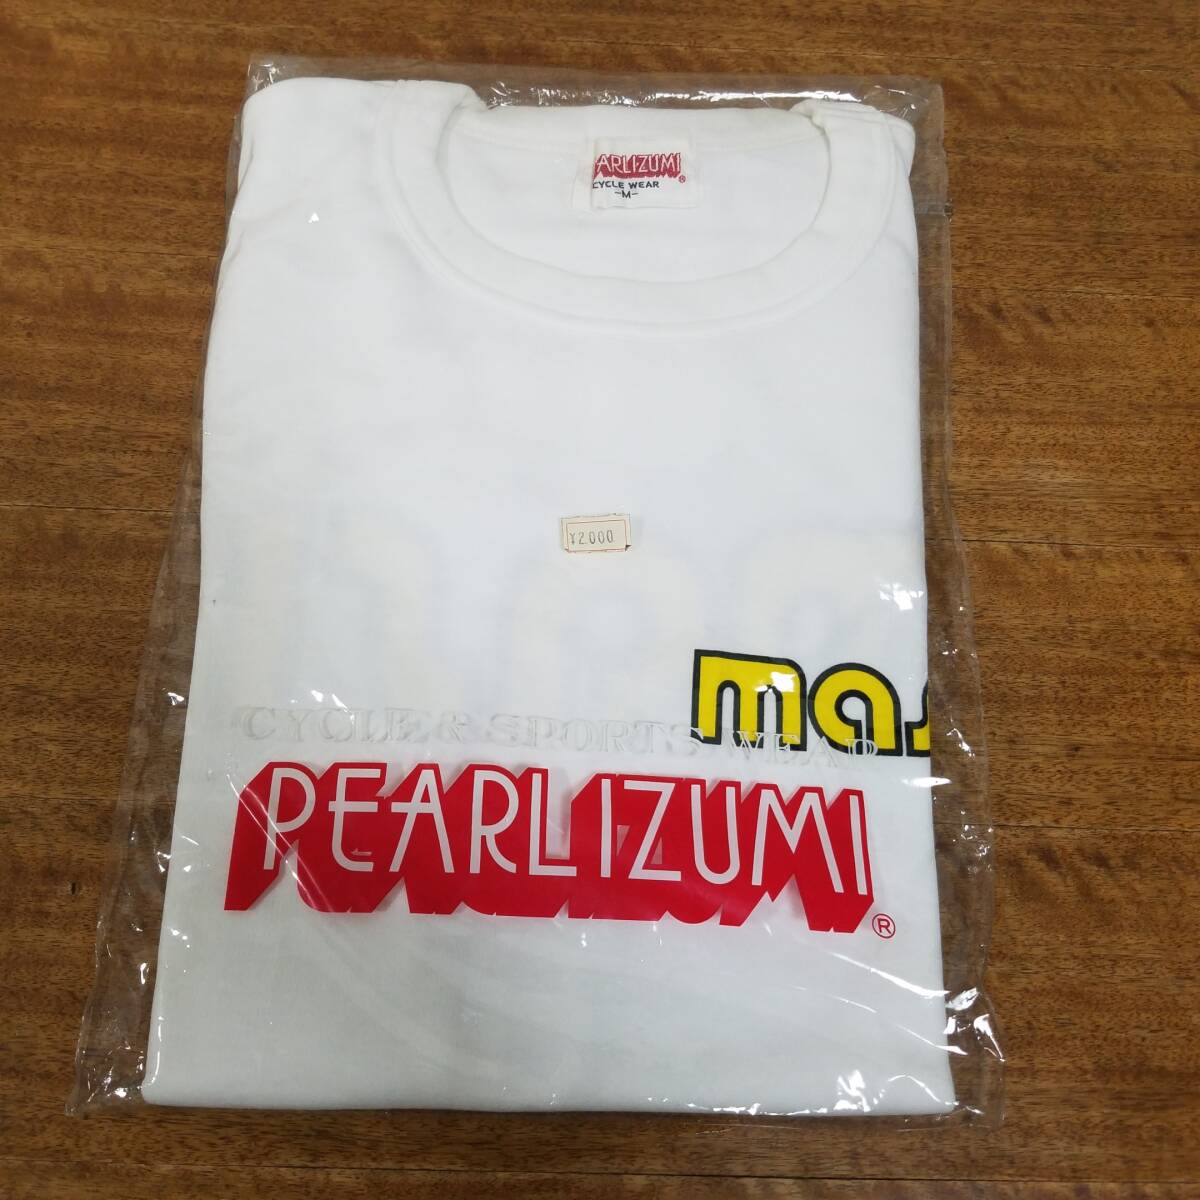 masi Tシャツ(М)　MADE IN JAPAN PEARL IZUMI CYCLE WEAR 　New Old Stock (NOS) 未使用品 ビンテージ_画像3